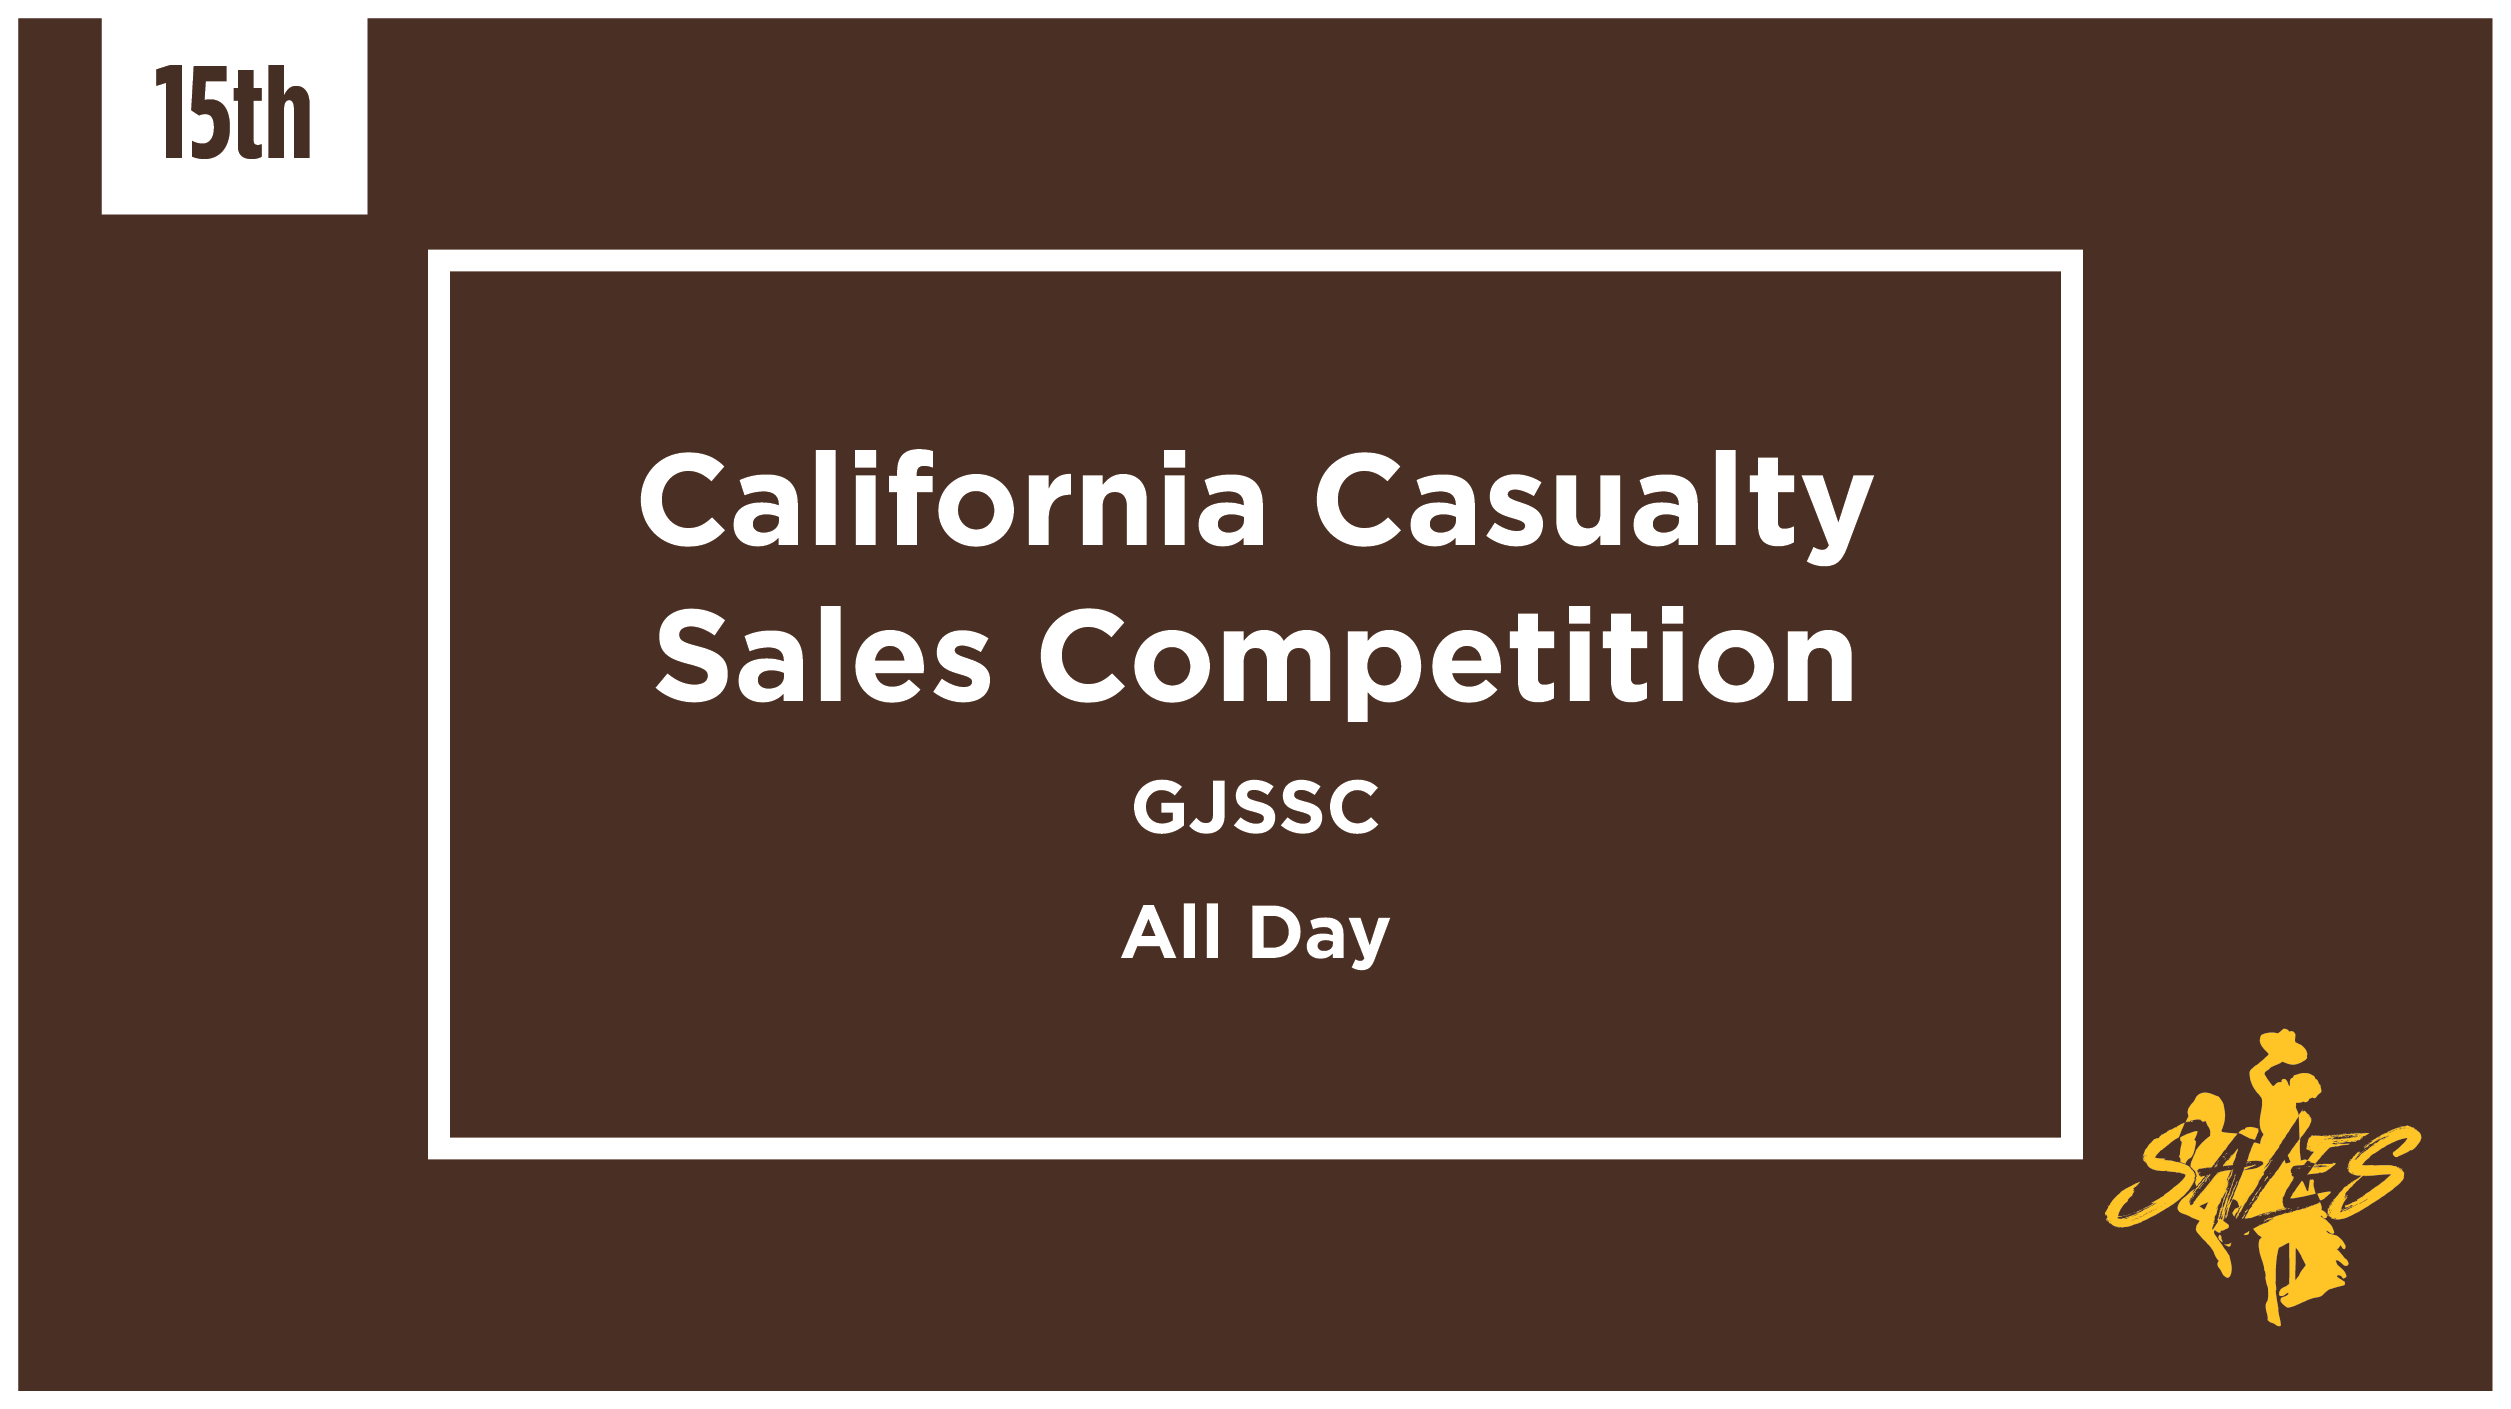 California Casualty Sales Competition